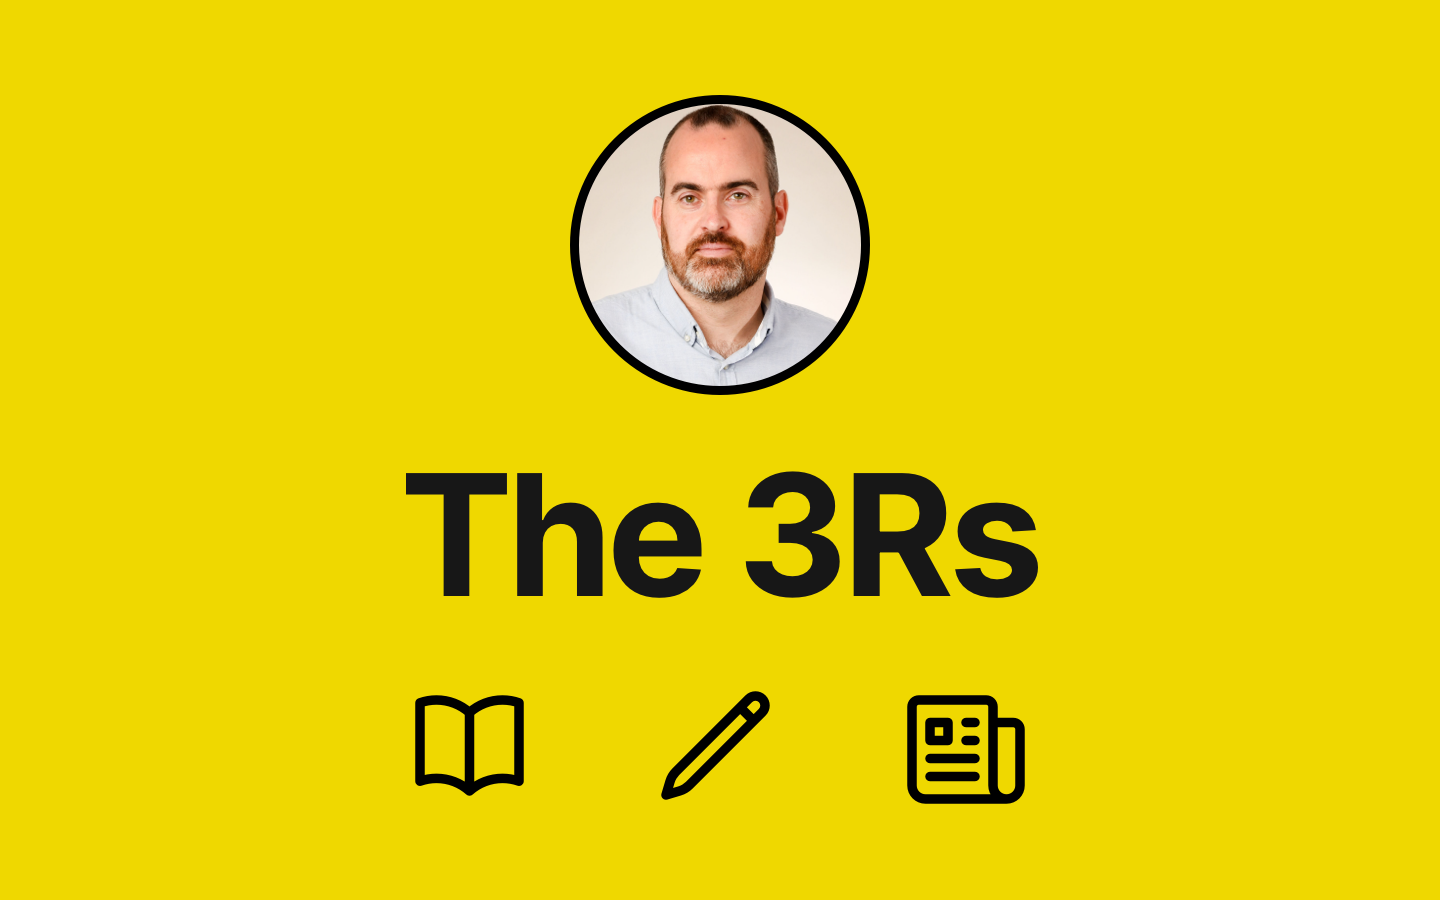 The 3Rs - Reading, writing, and research to be interested in #42 feature image